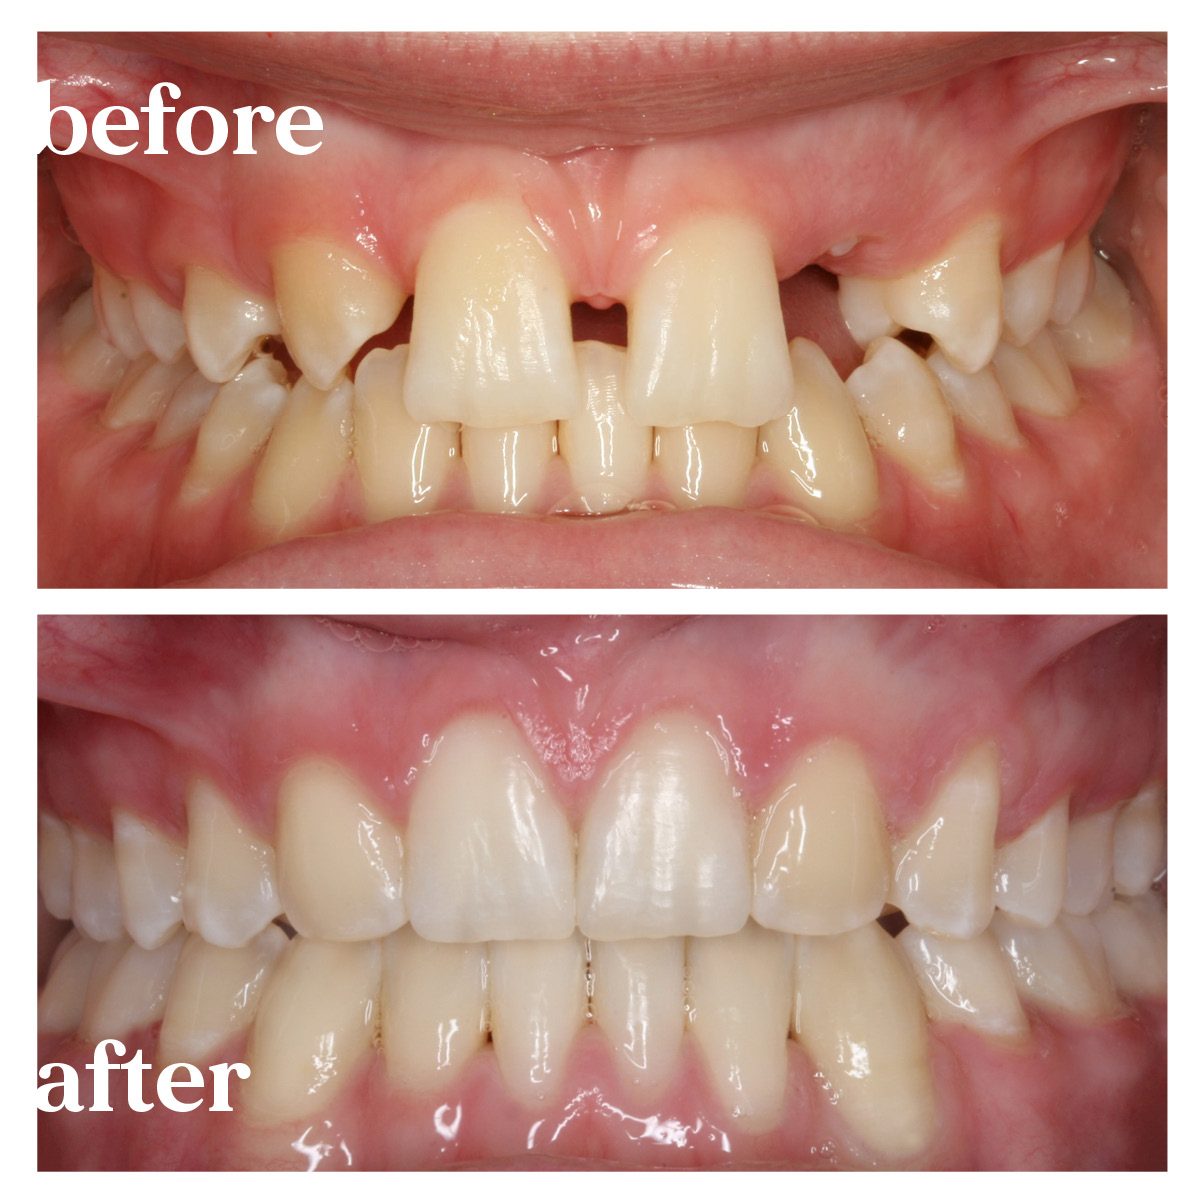 before and after orthodontic treatment